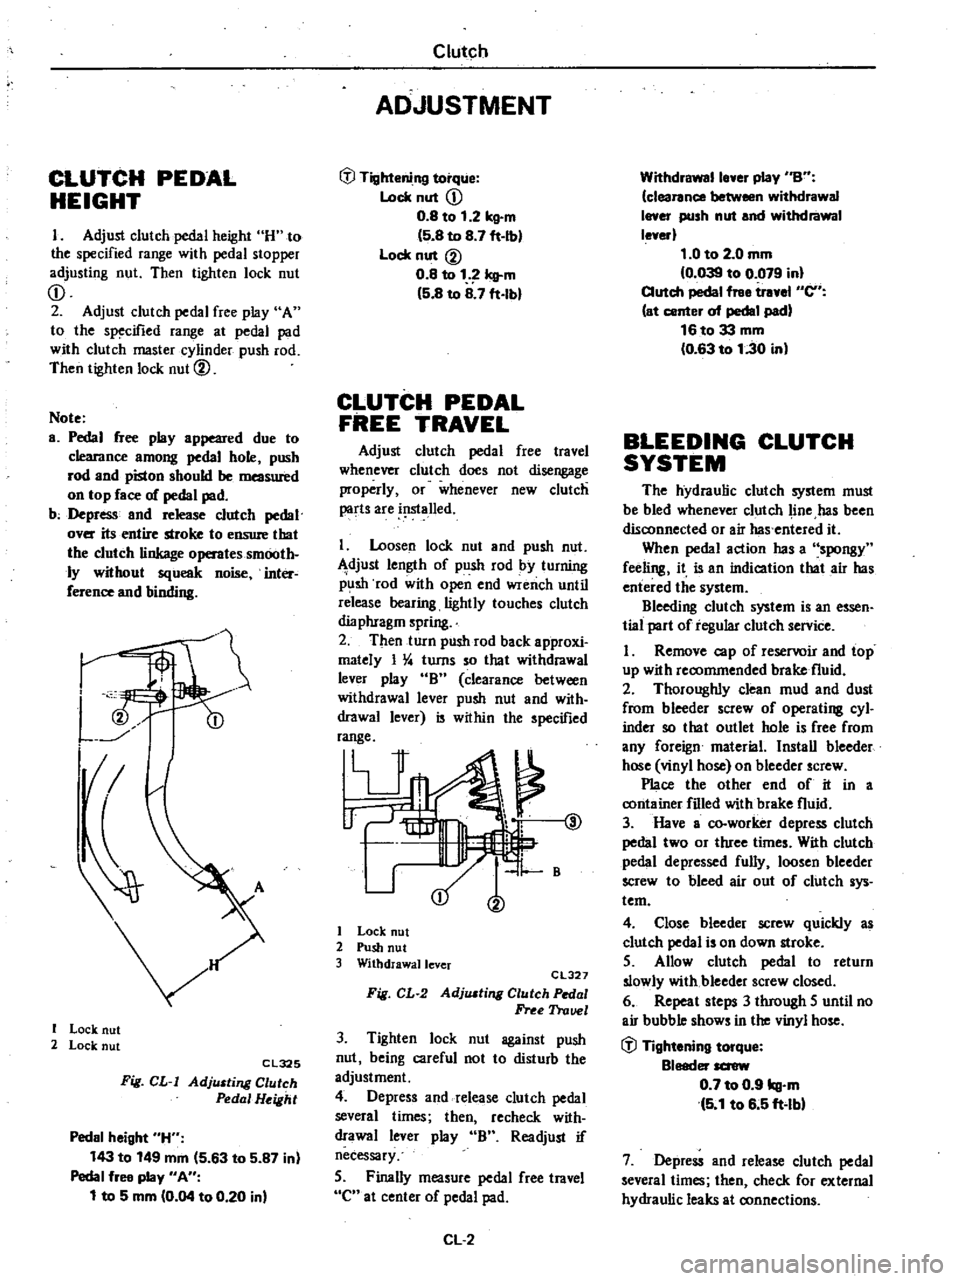 DATSUN 210 1979  Service Manual 
CLUTCH 
PEDAL

HEIGHT

I

Adjust 
clutch

pedal 
height 
H 
to

the

specified 
range 
with

pedal 
stopper

adjusting 
nut 
Then

tighten 
lock 
nut

CD

2

Adjust 
clutch

pedal 
free

play 
A

to 